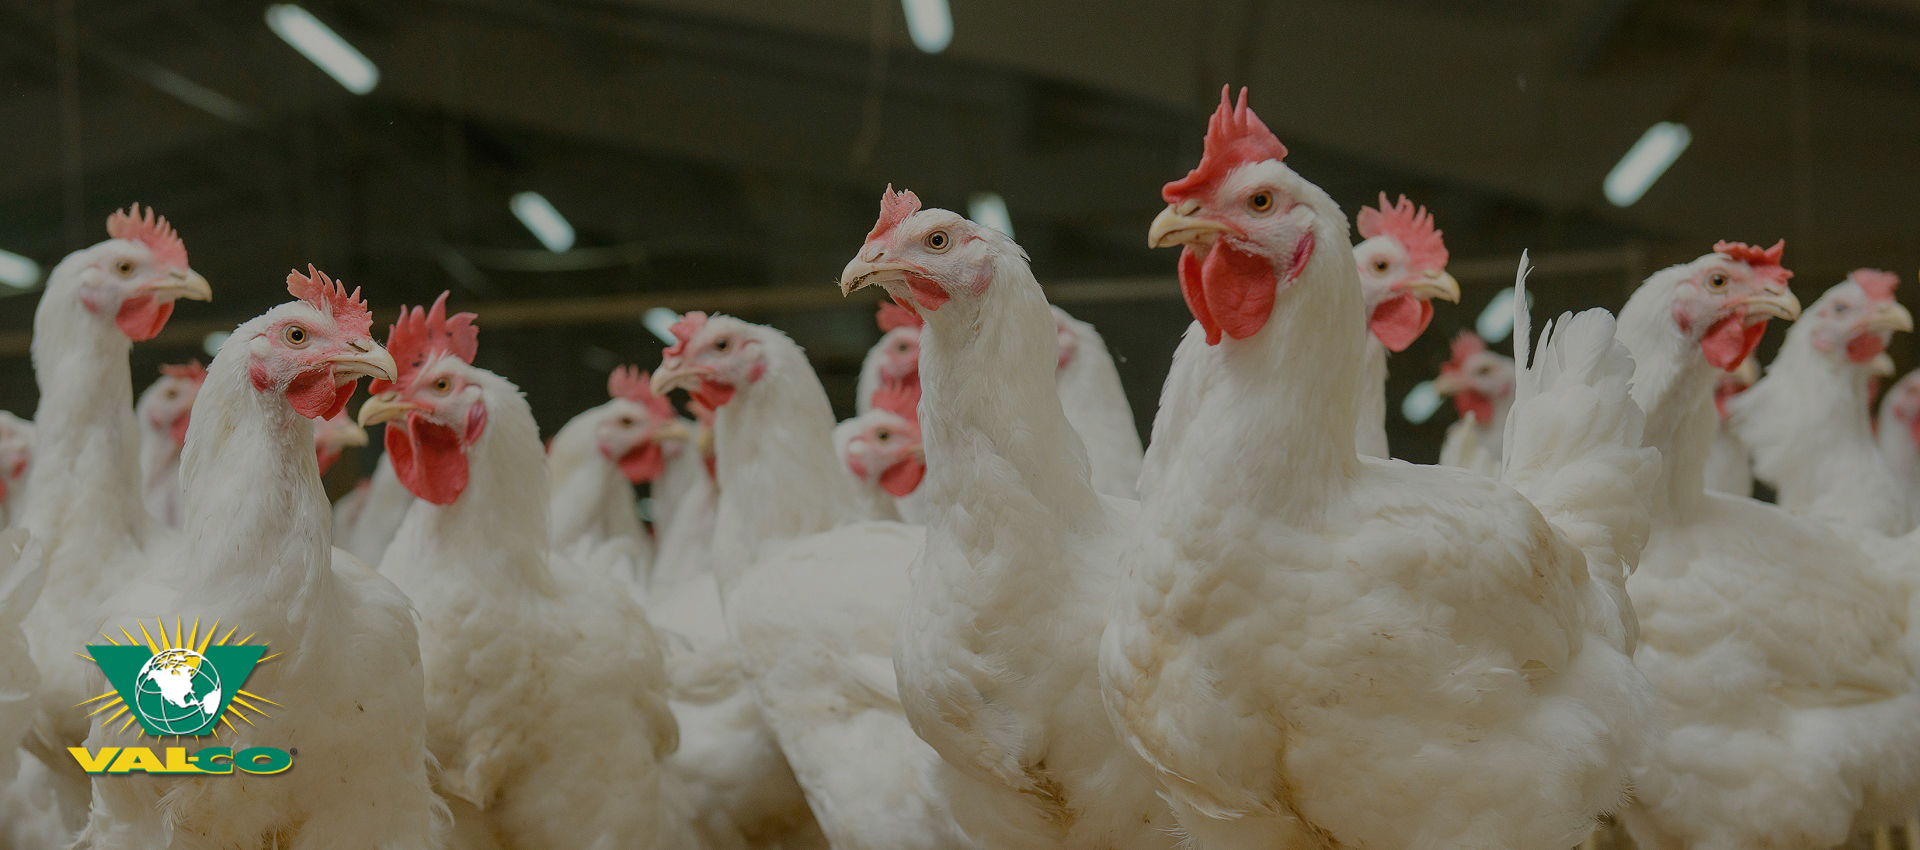 Complete Poultry Equipment and Solutions for Broiler, Layers, and Breeder Farms